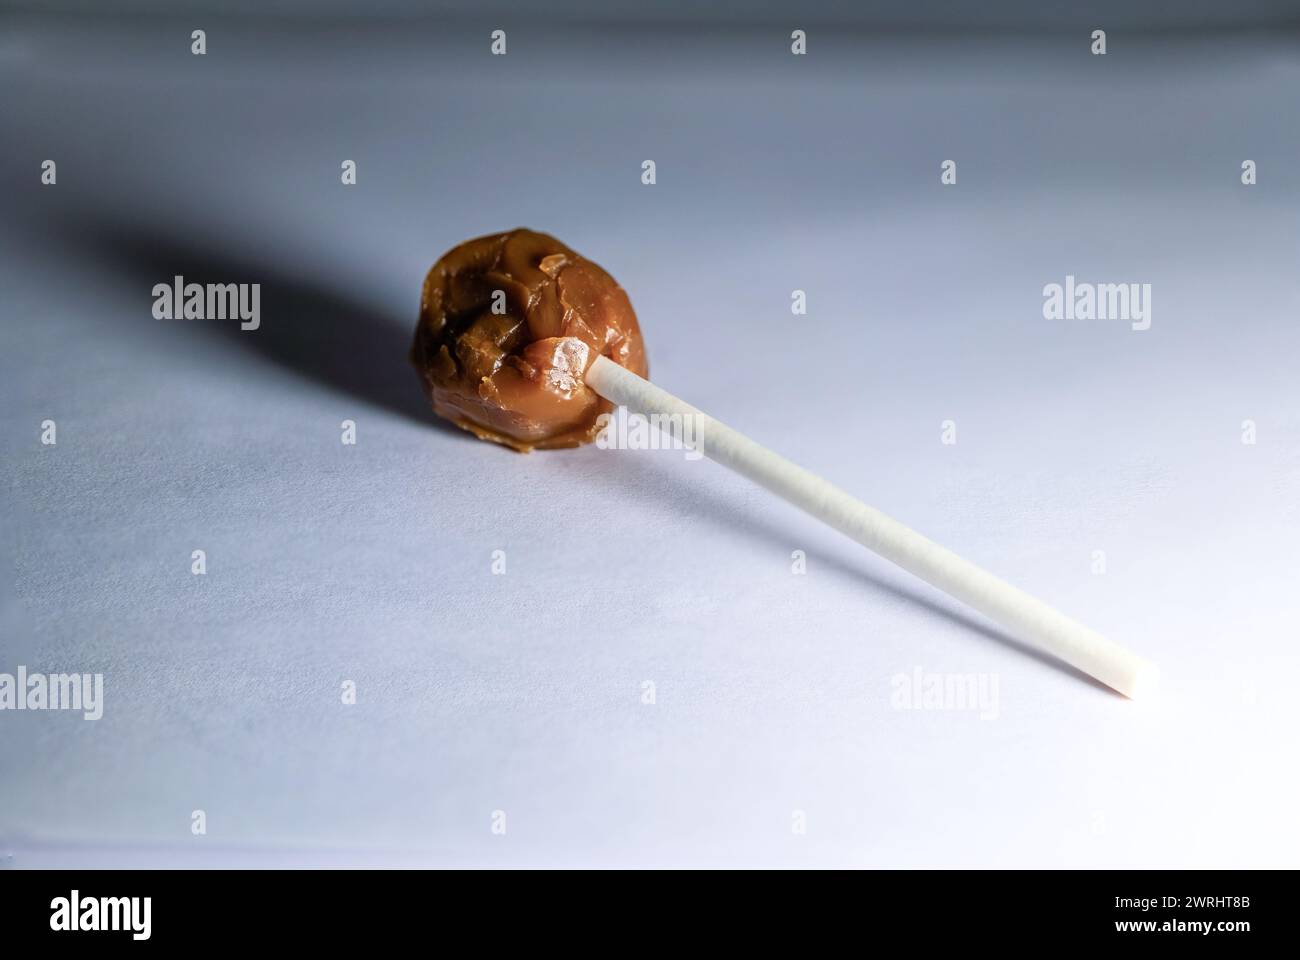 A mouthwatering chocolate lollipop with a smooth, glossy surface, captured in sharp focus on a white background Stock Photo